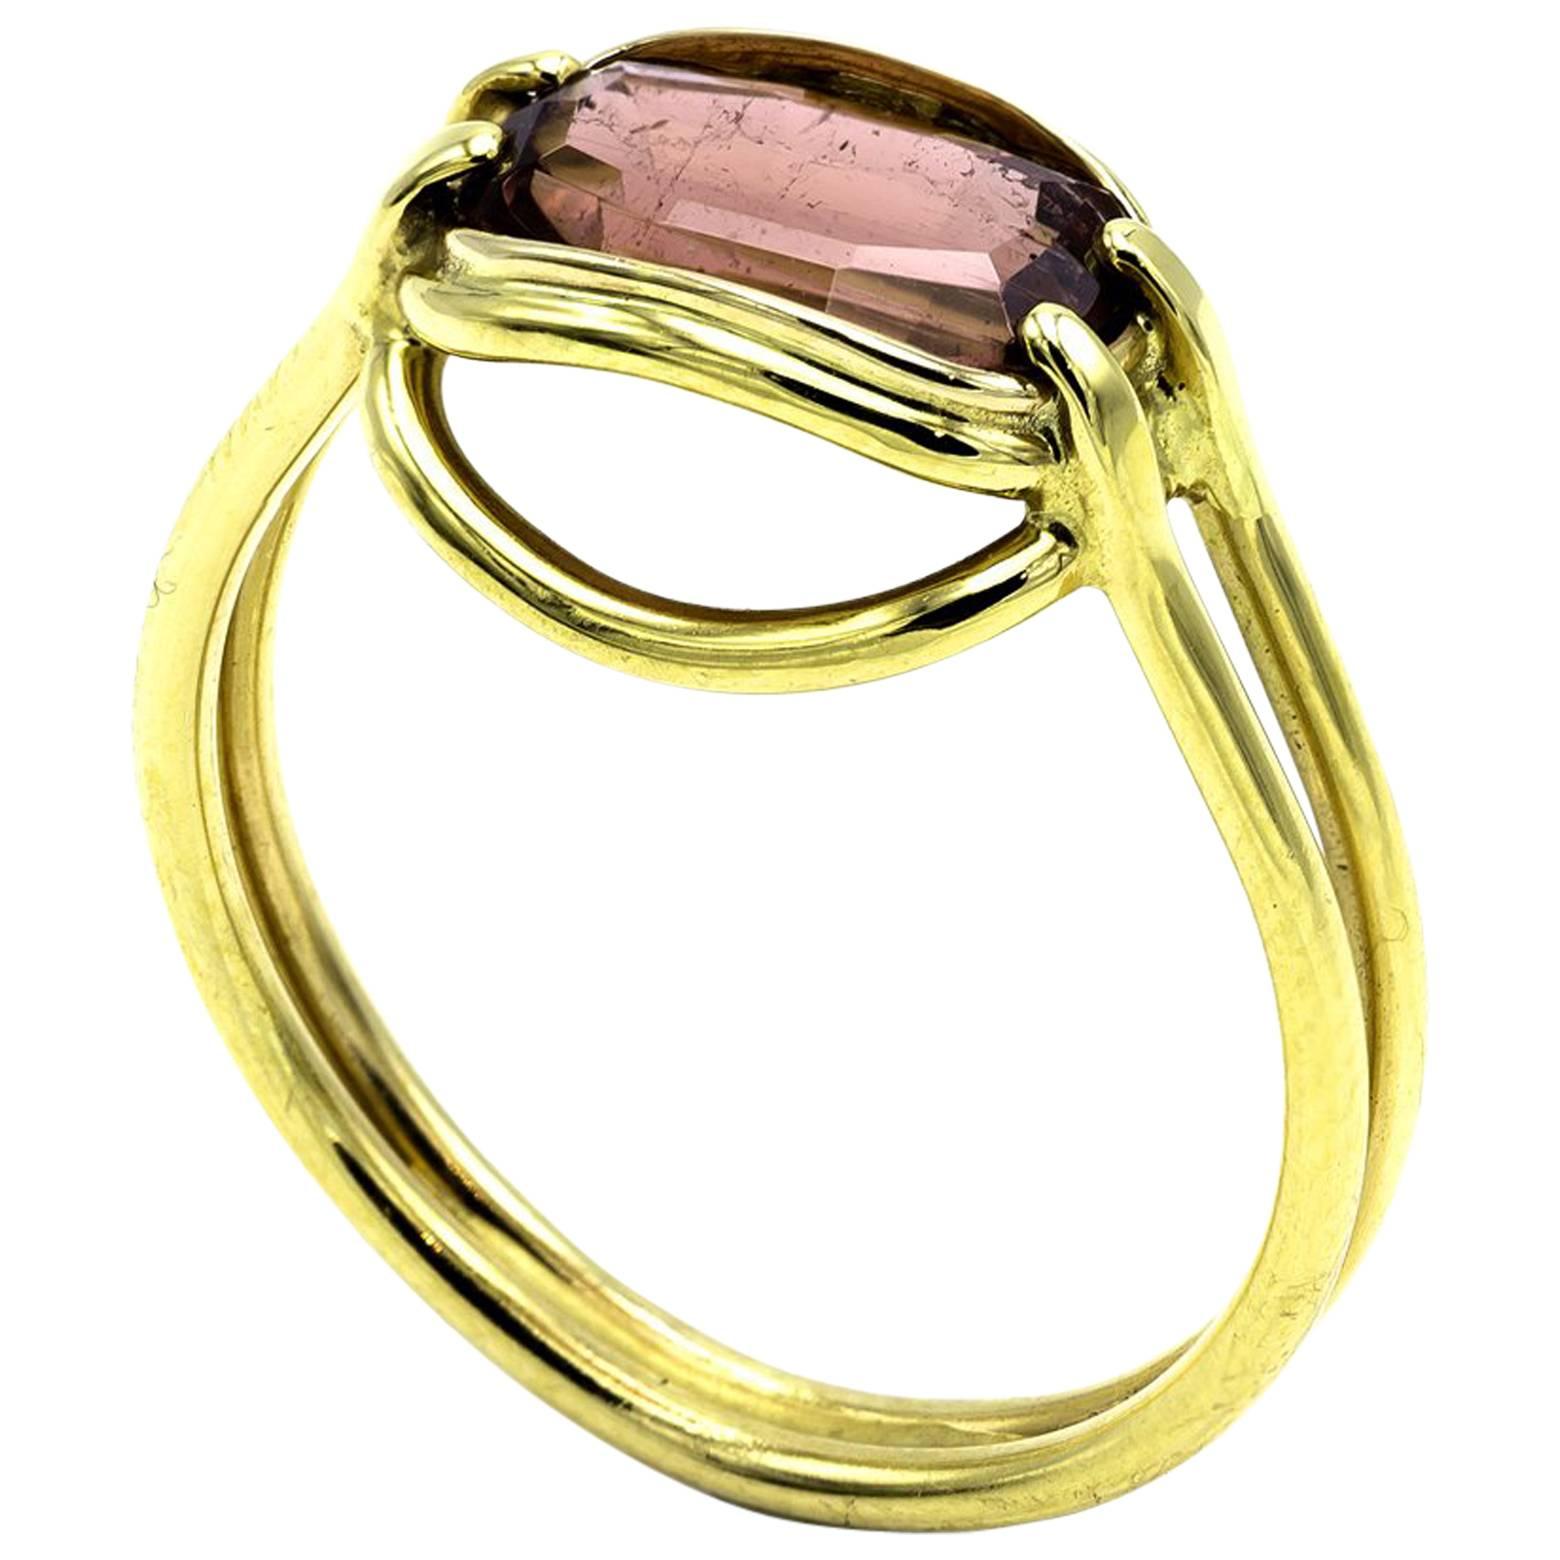 Square Pink Cushion Tourmaline Double Band Ring in Gold